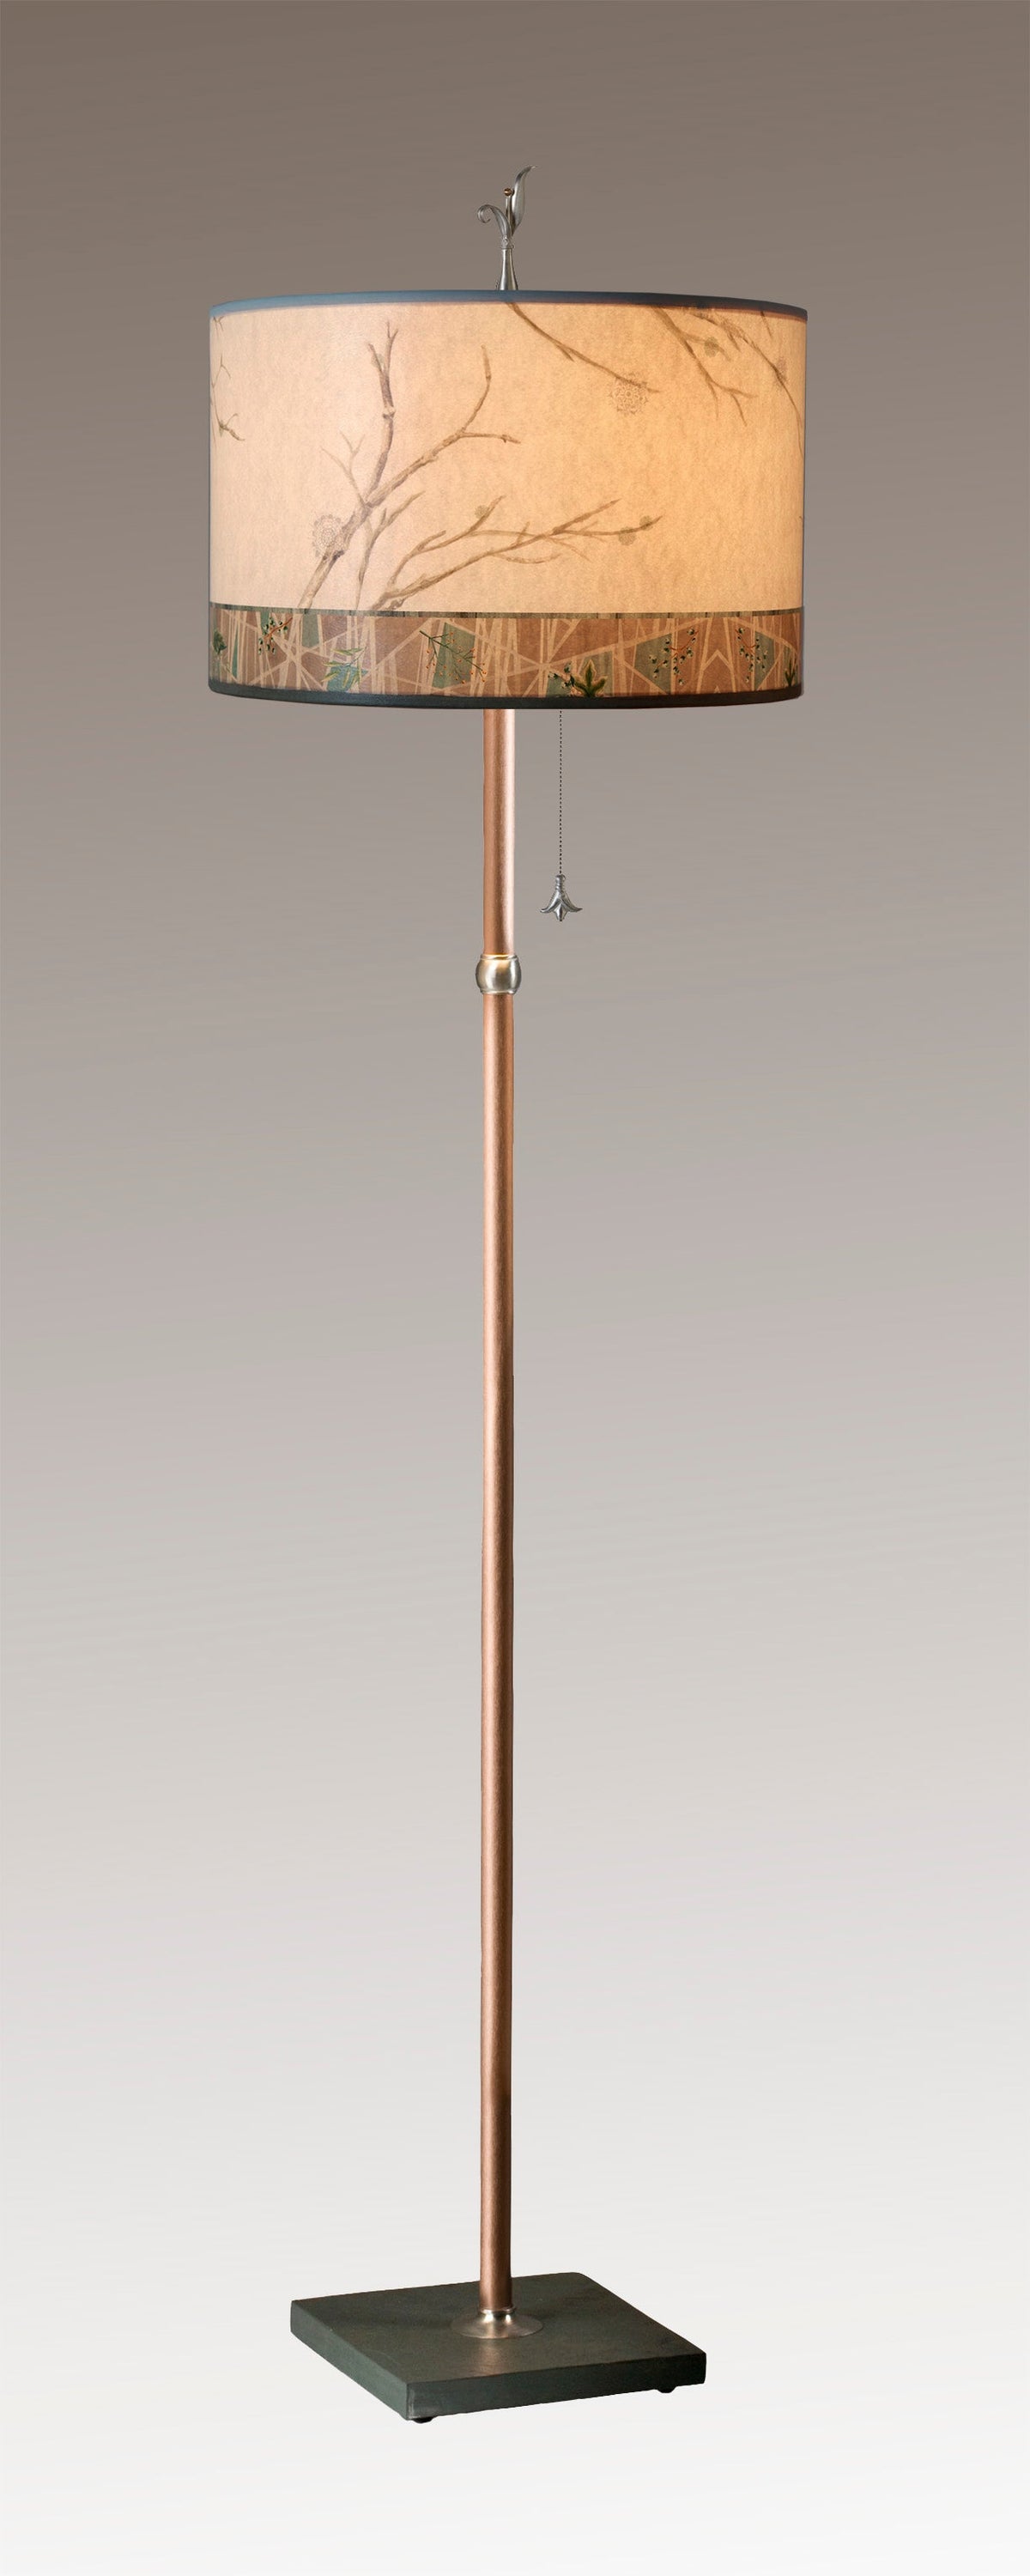 Copper Floor Lamp with Large Drum Lampshade in Prism Branch